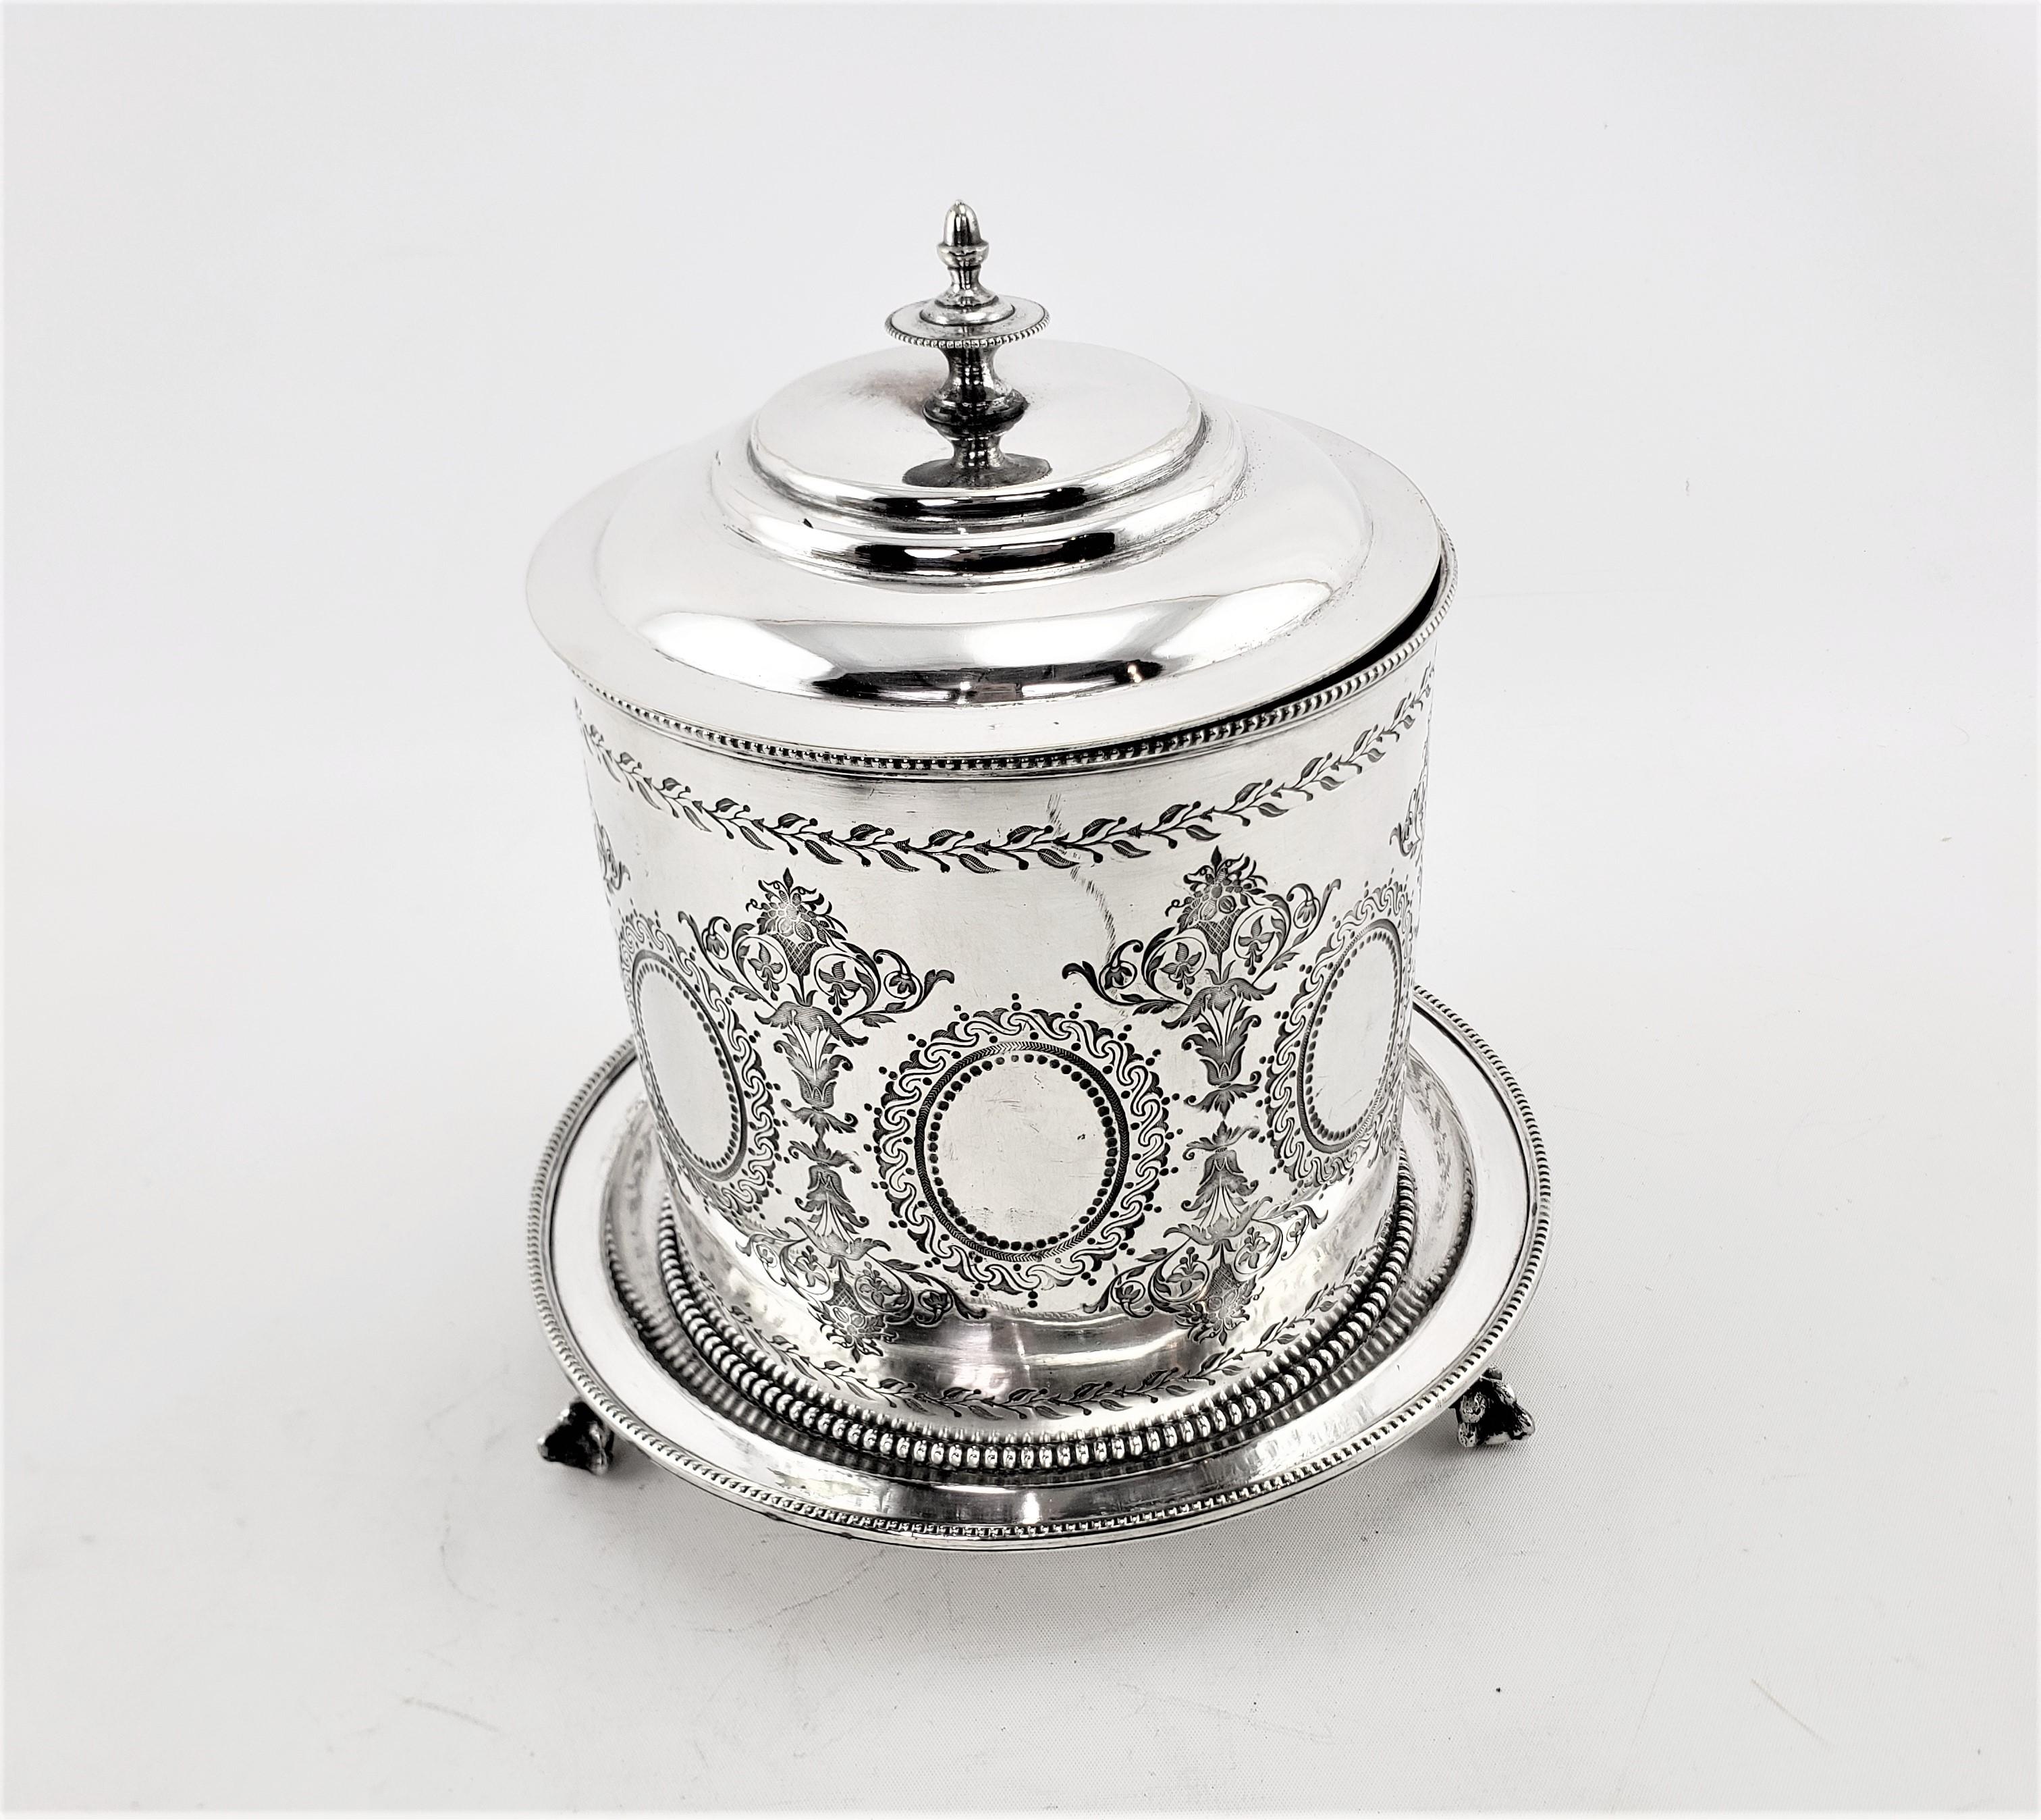 This antique oval shaped and silver plated biscuit barrel was made in England in approximately 1880 in a period Victorian style. This biscuit barrel has an oval shape with a hinged lid and elaborate stylized wreath engraving around the sides and